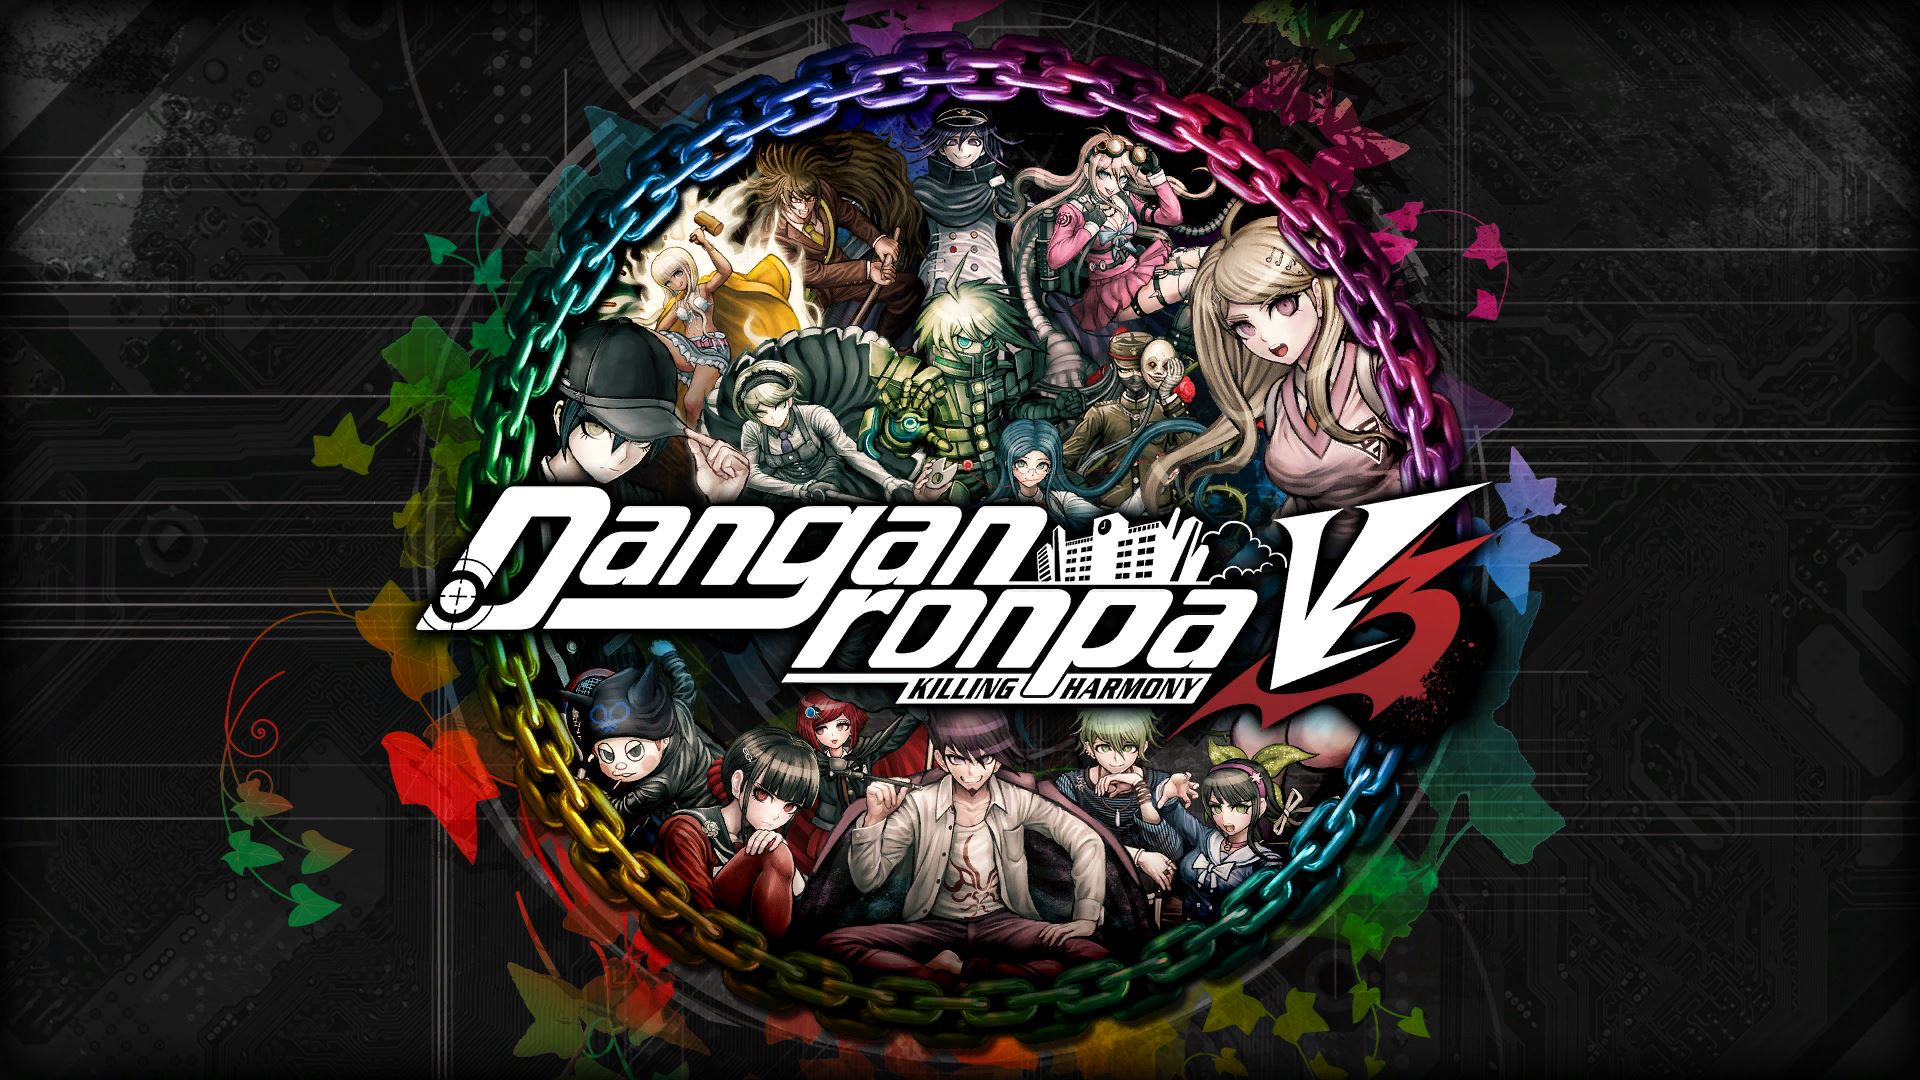 banned video games - Danganronpa V3 not banned but release cancelled in south Korea